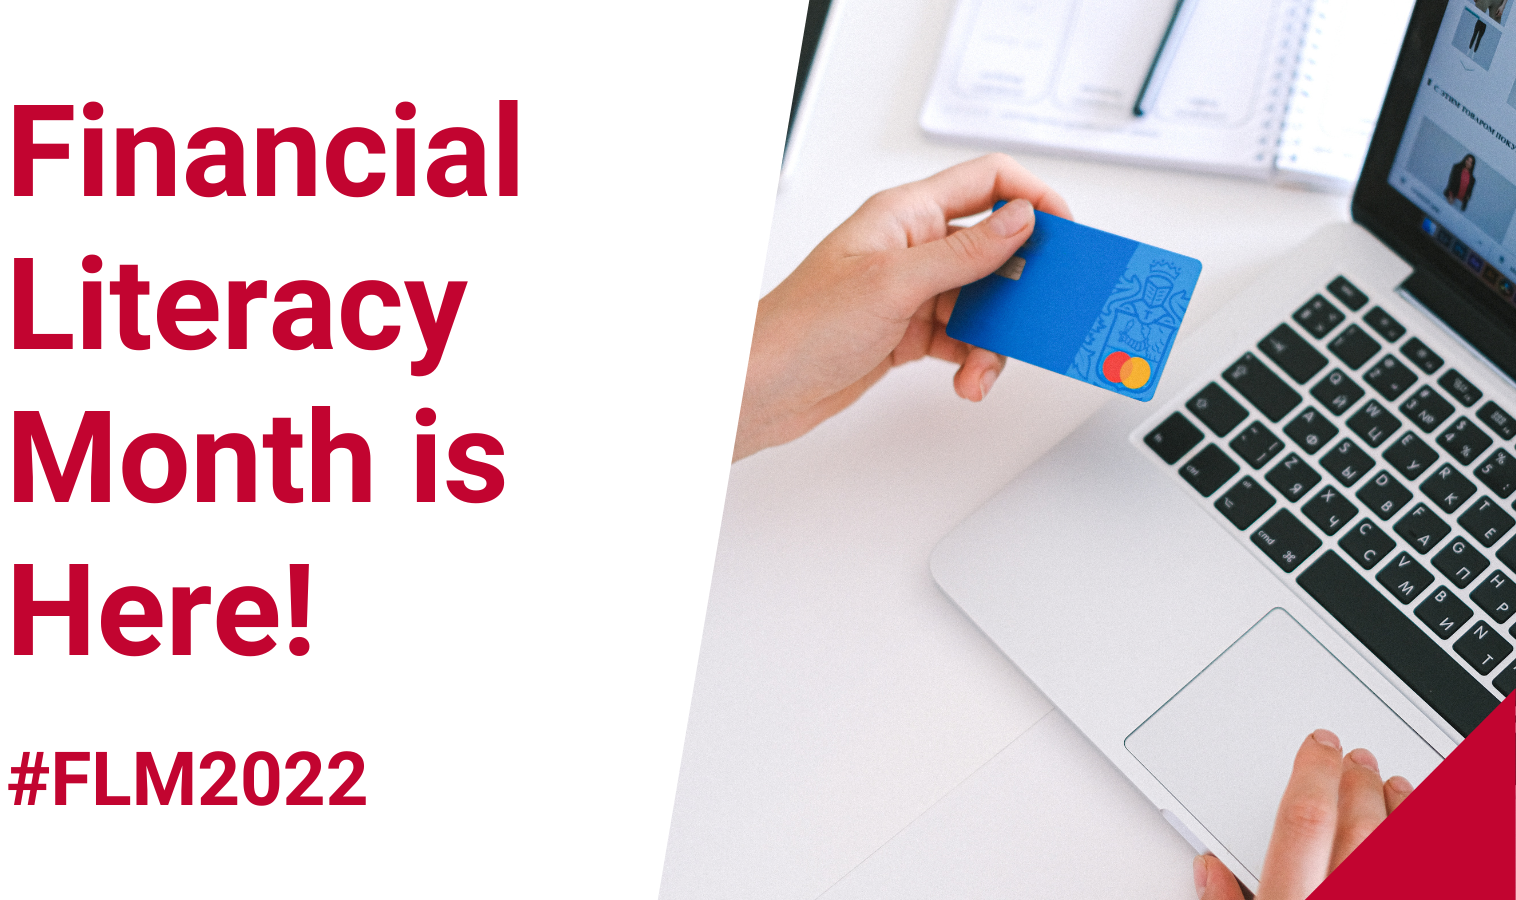 Financial Literacy Month is here! #FLM2022